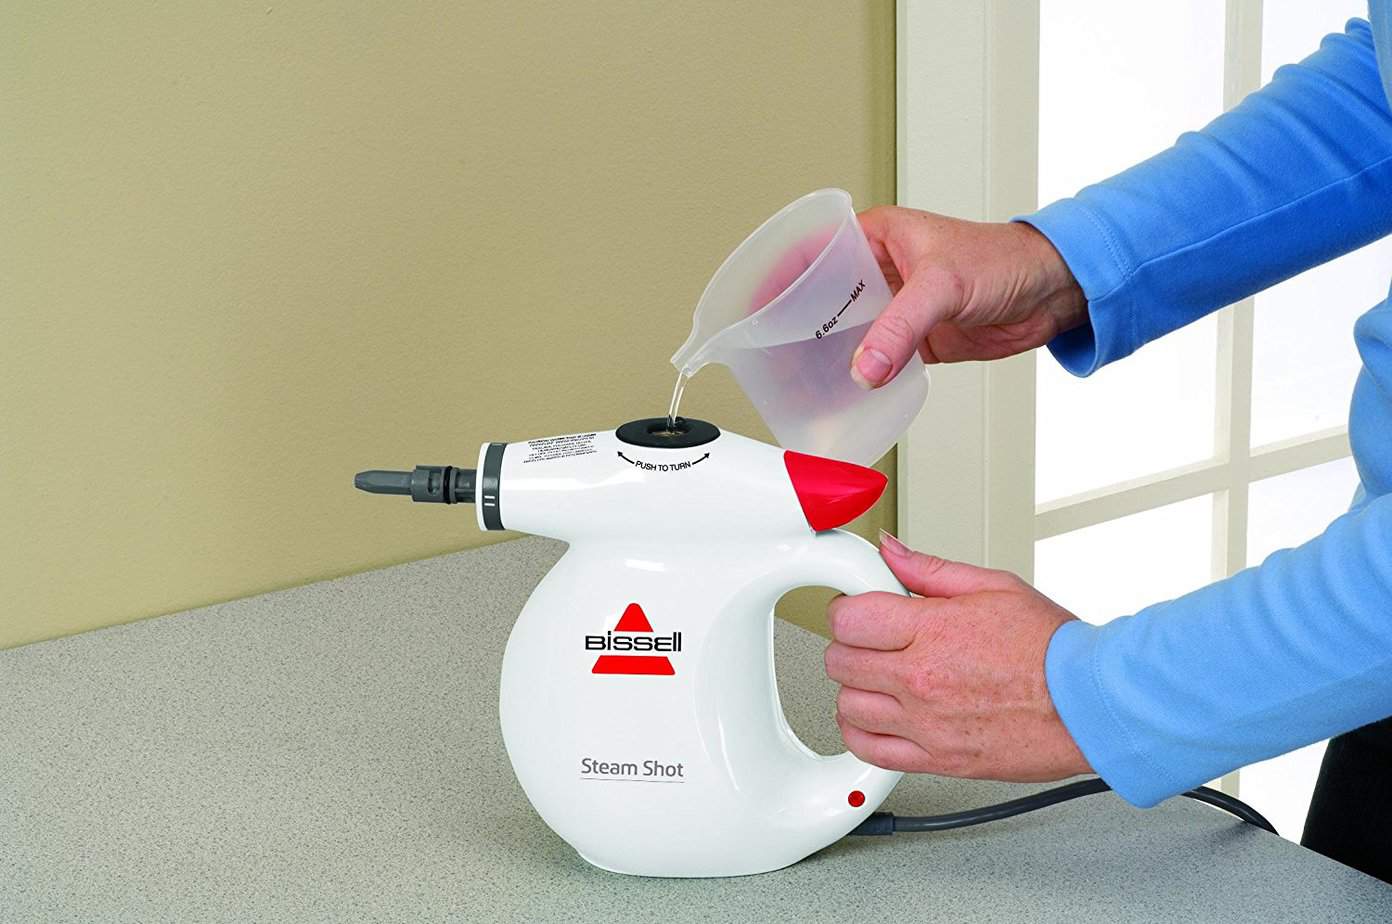 Prolectrix handheld steam cleaner manual